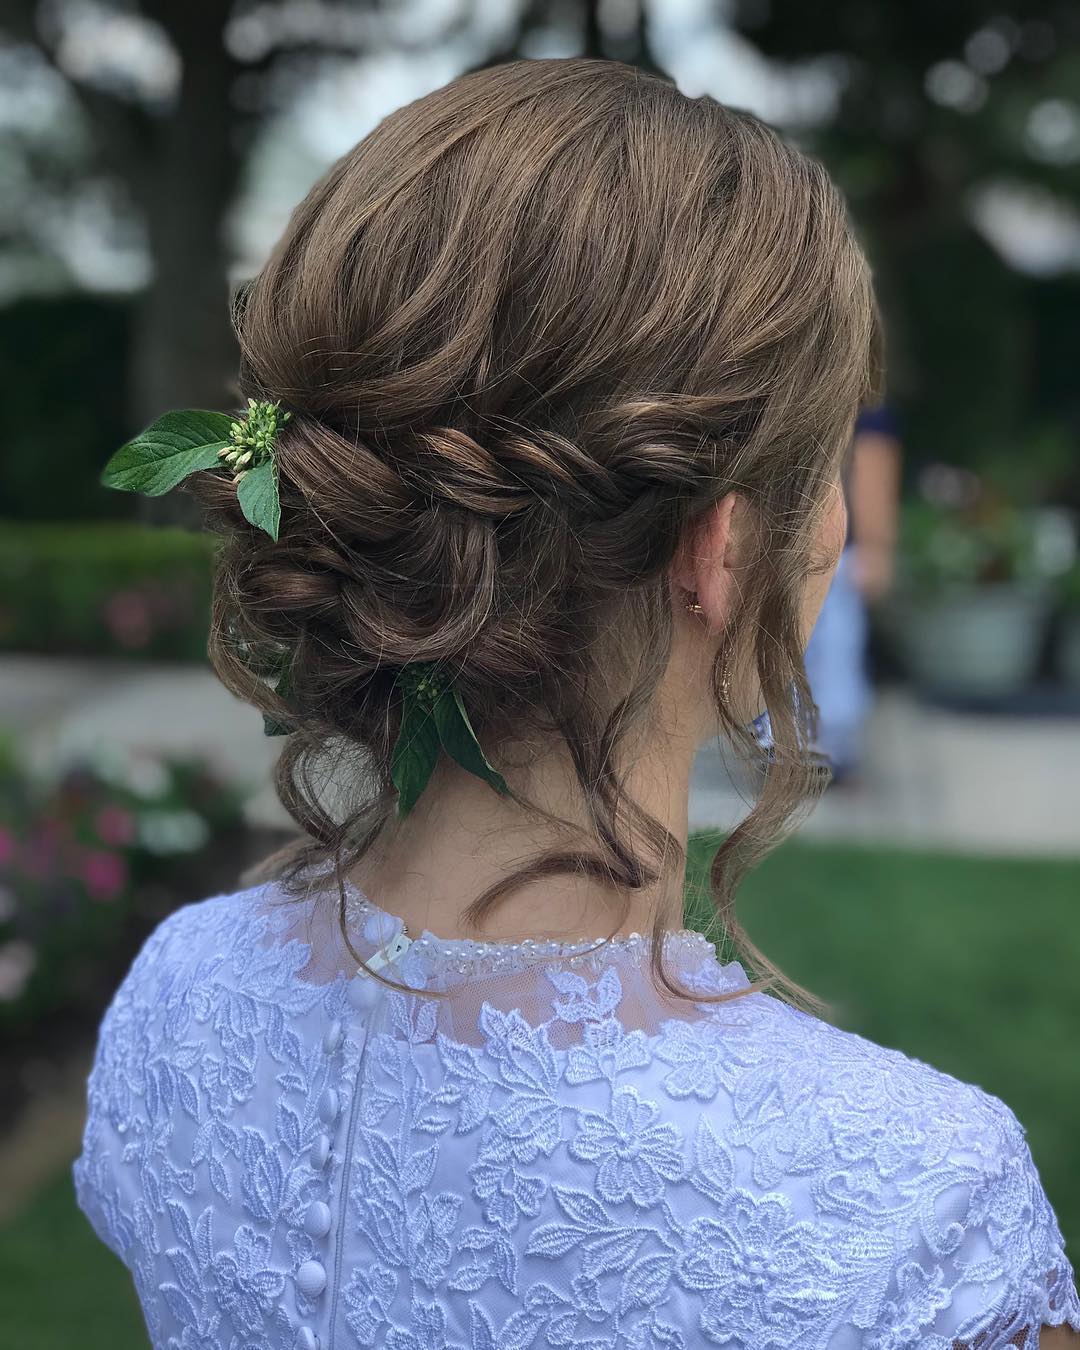 120 Short & Sexy Wedding Day Hairstyles for Brides